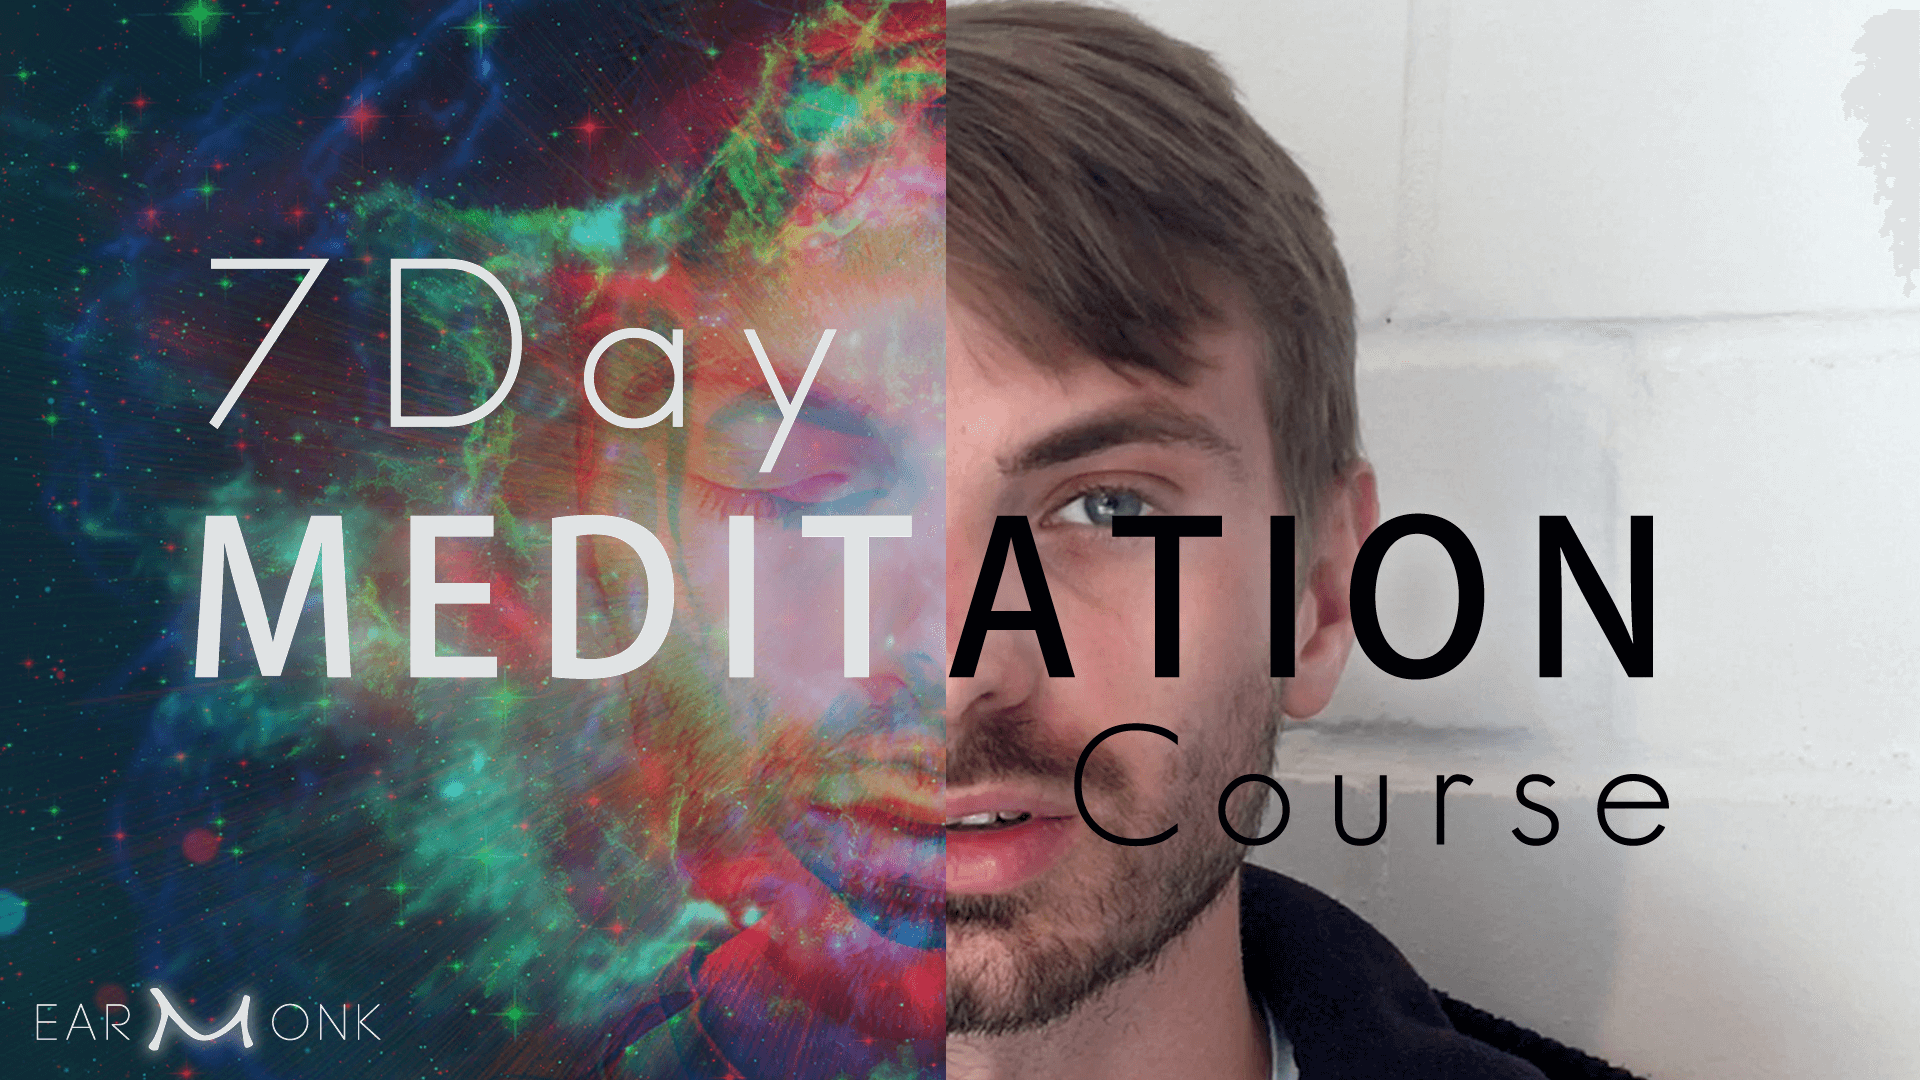 7day meditation course